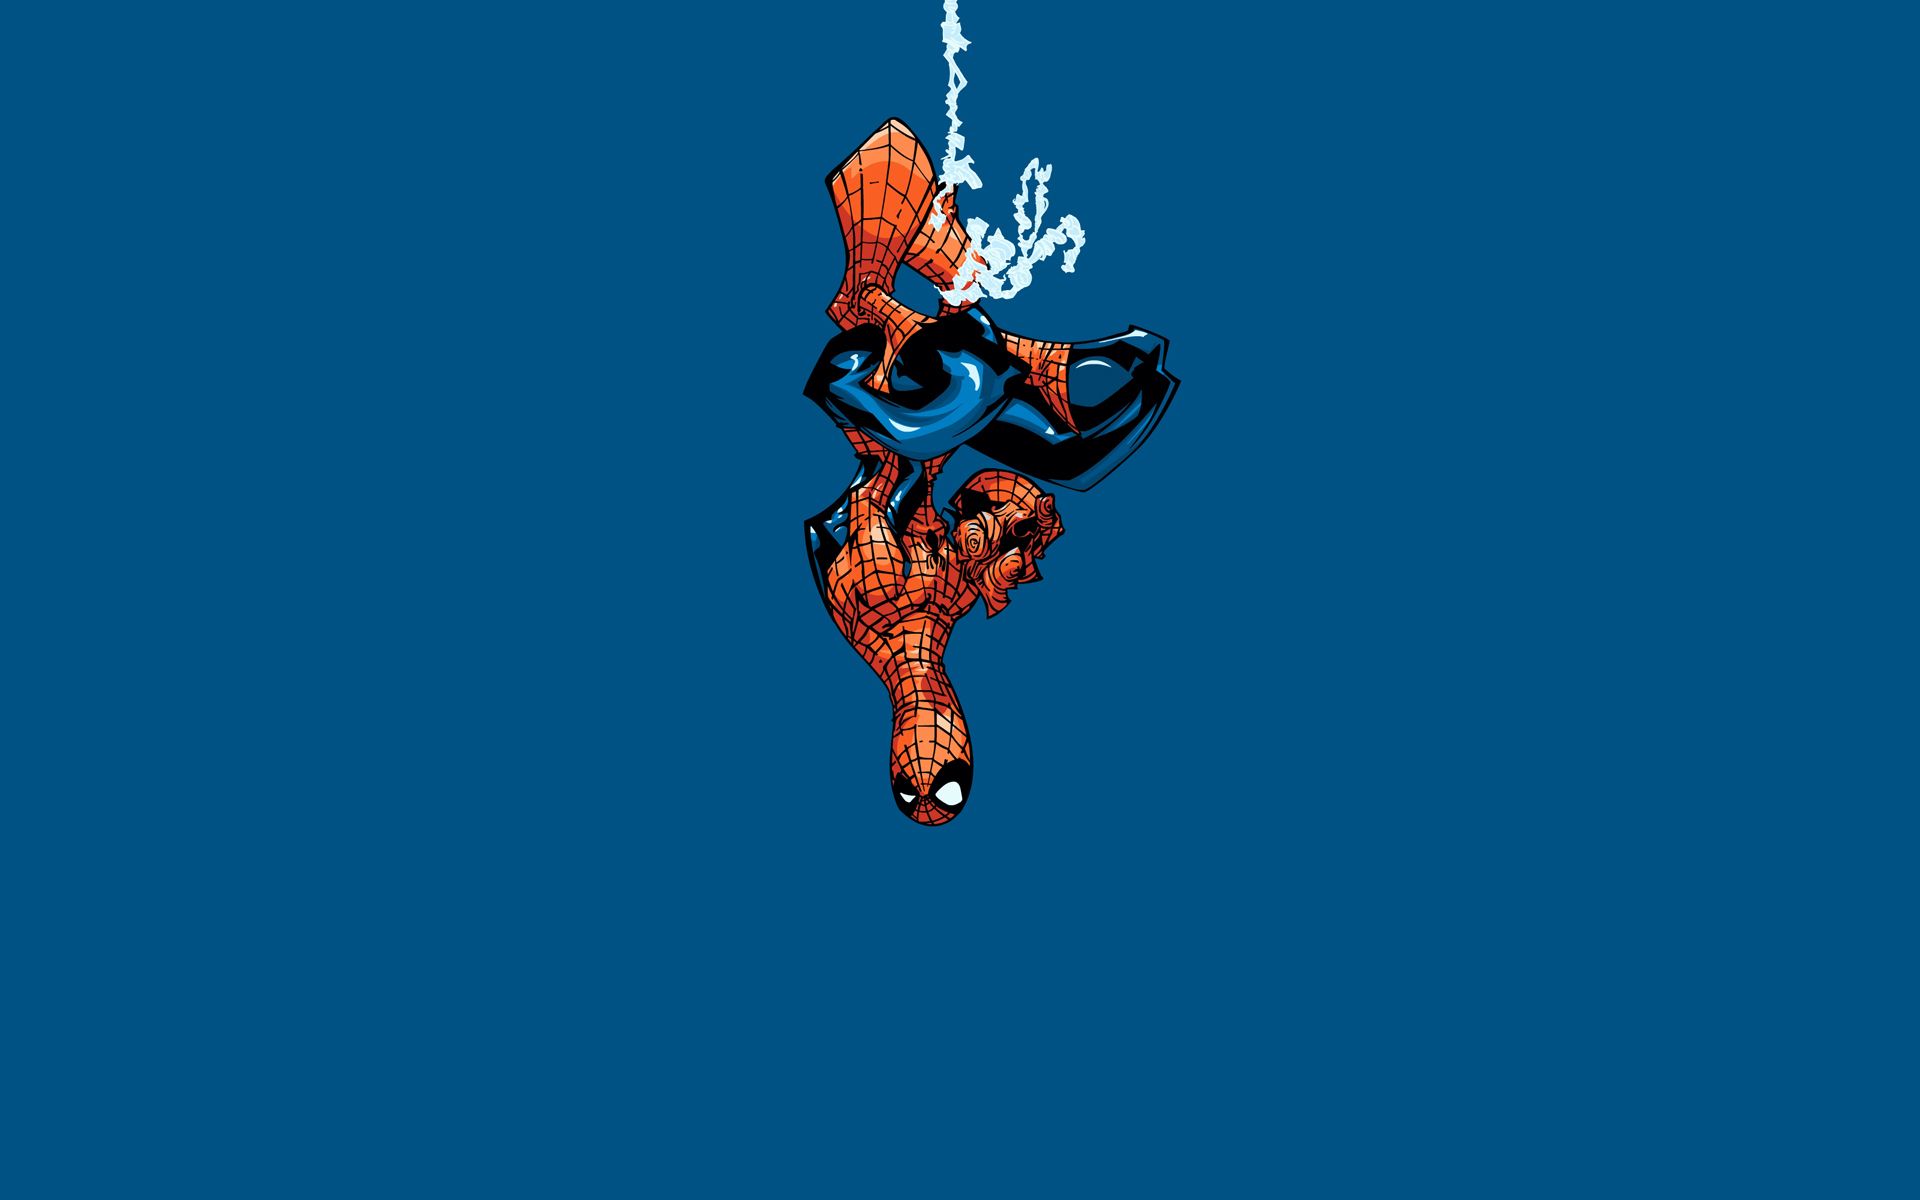 Classic Spiderman Wallpapers